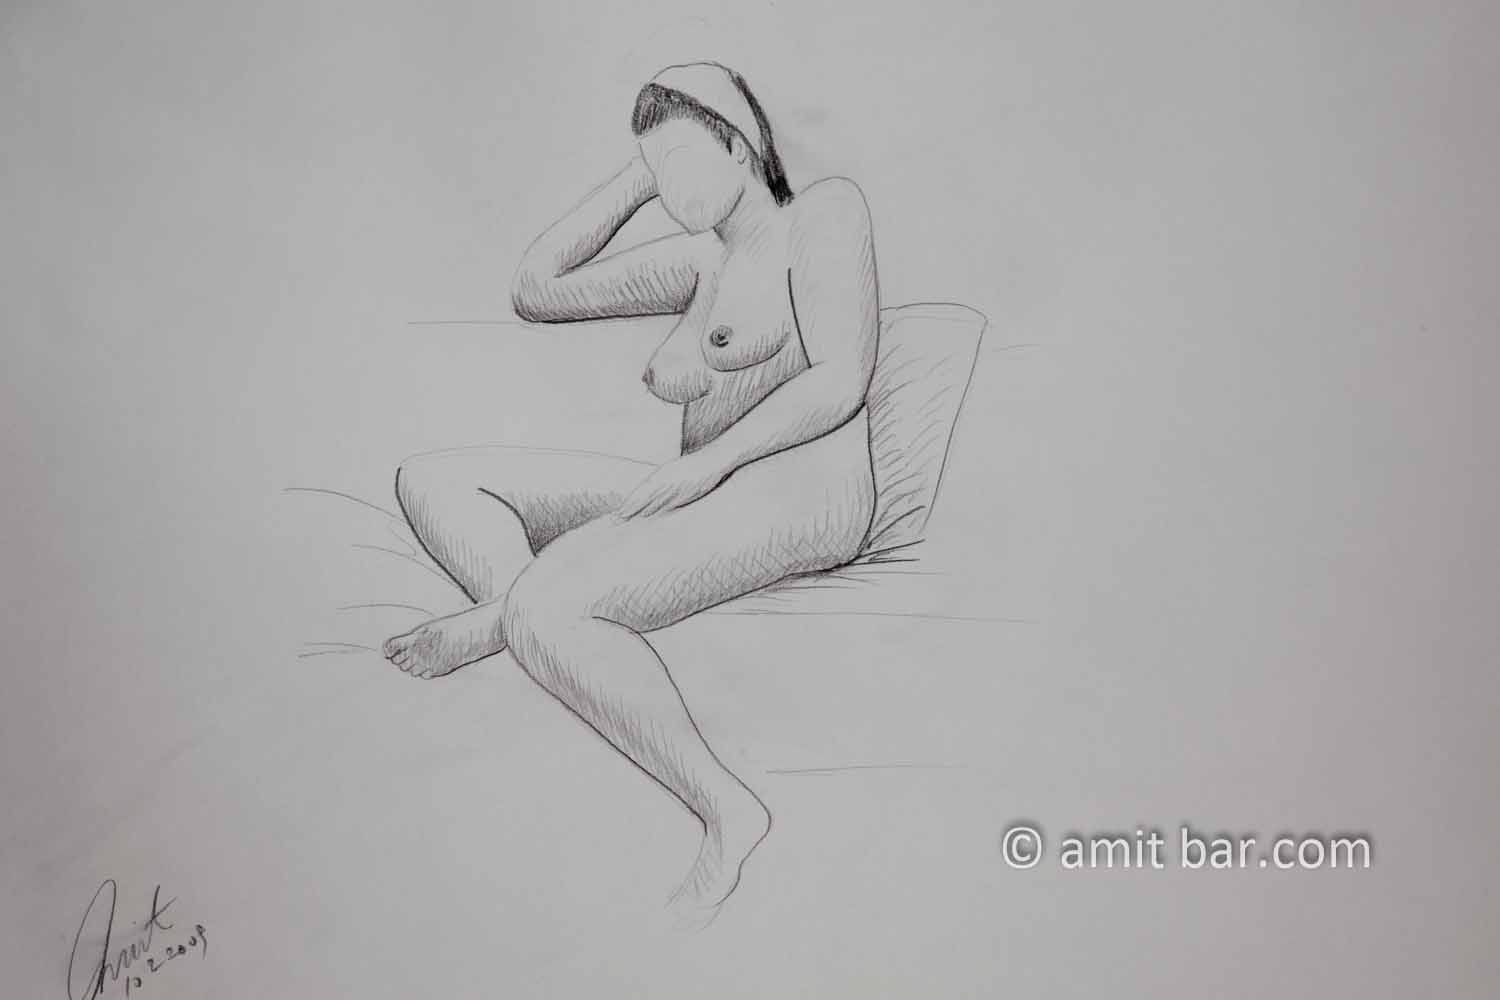 Seated nude model with a band in her hair. Pencil drawing